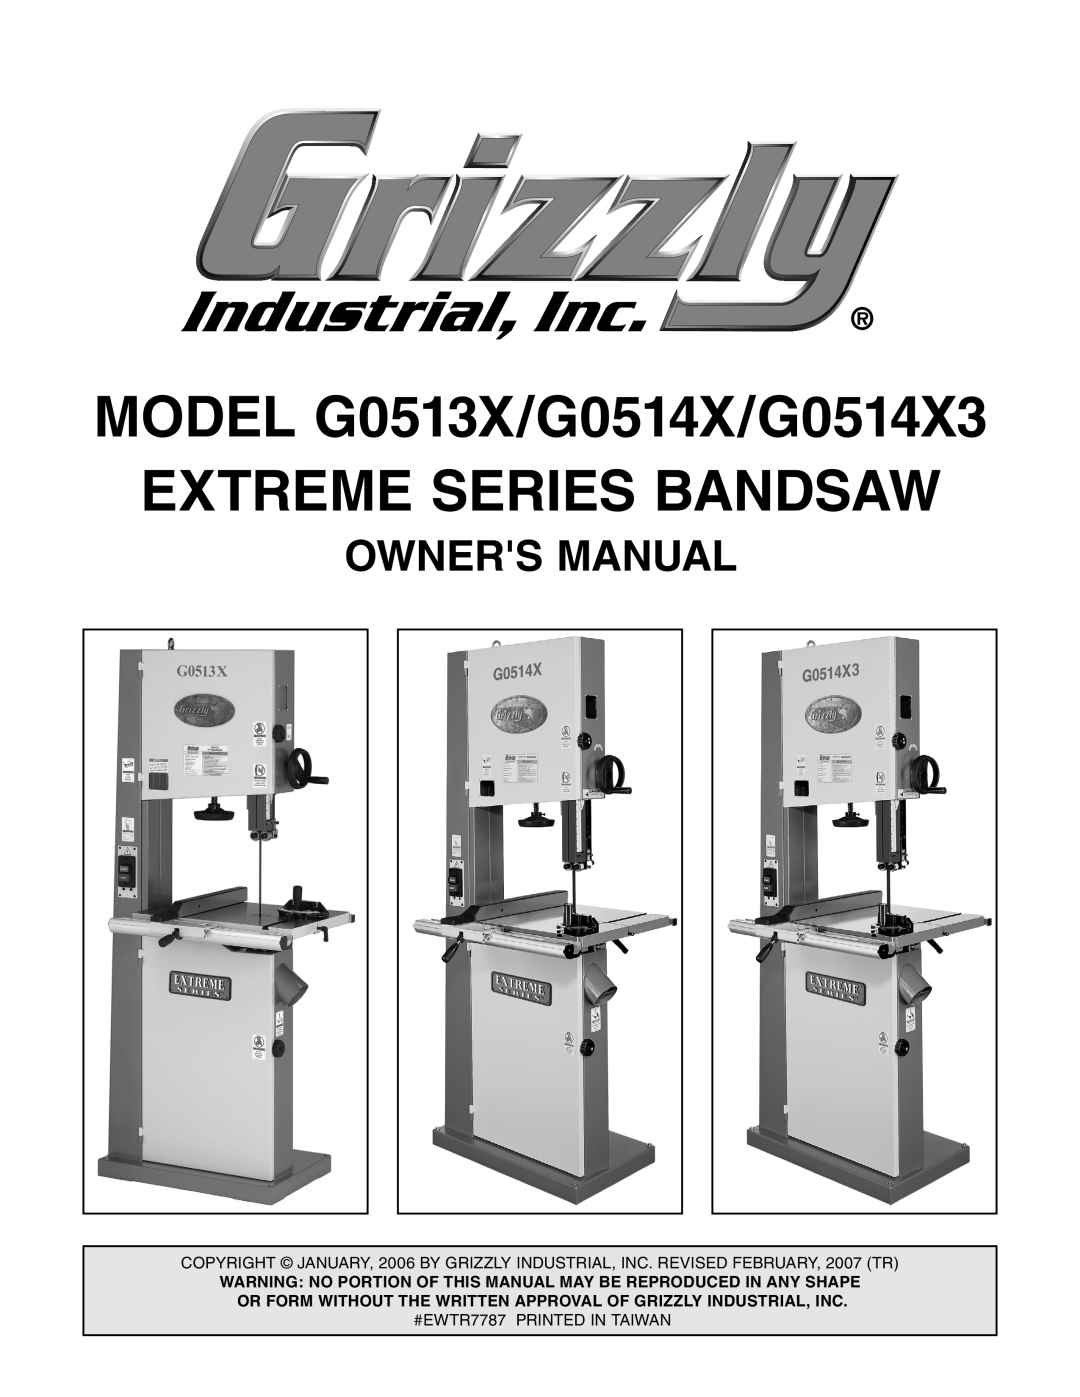 Grizzly owner manual Owners Manual, MODEL G0513X/G0514X/G0514X3 EXTREME SERIES BANDSAW 